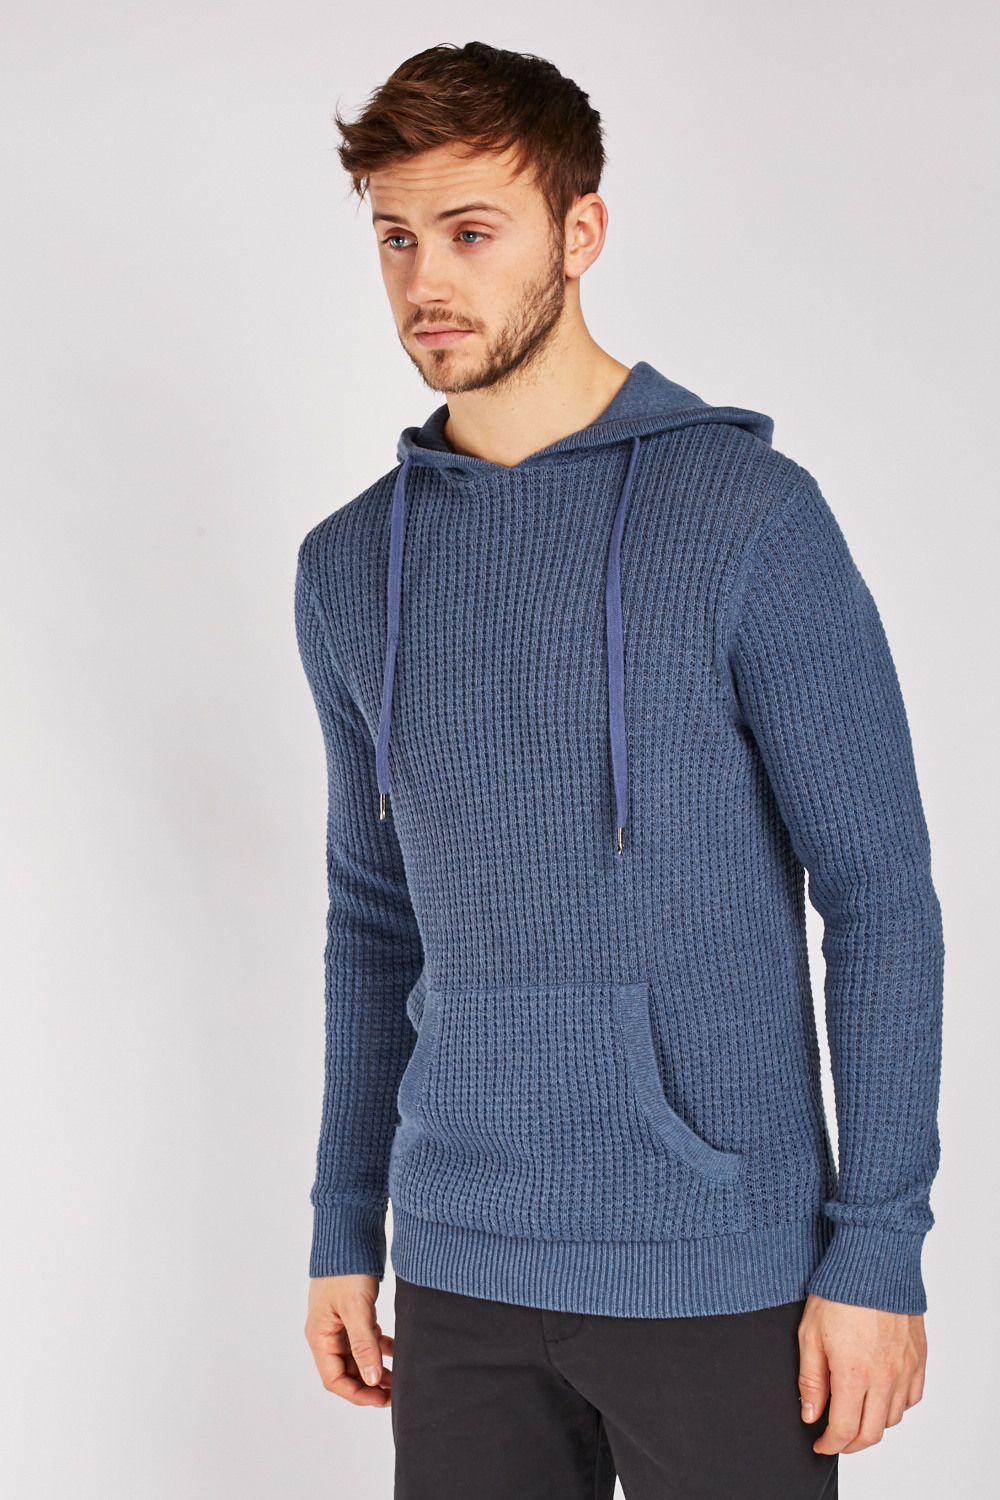 Pouch Pocket Front Hooded Knit Jumper - Just $6